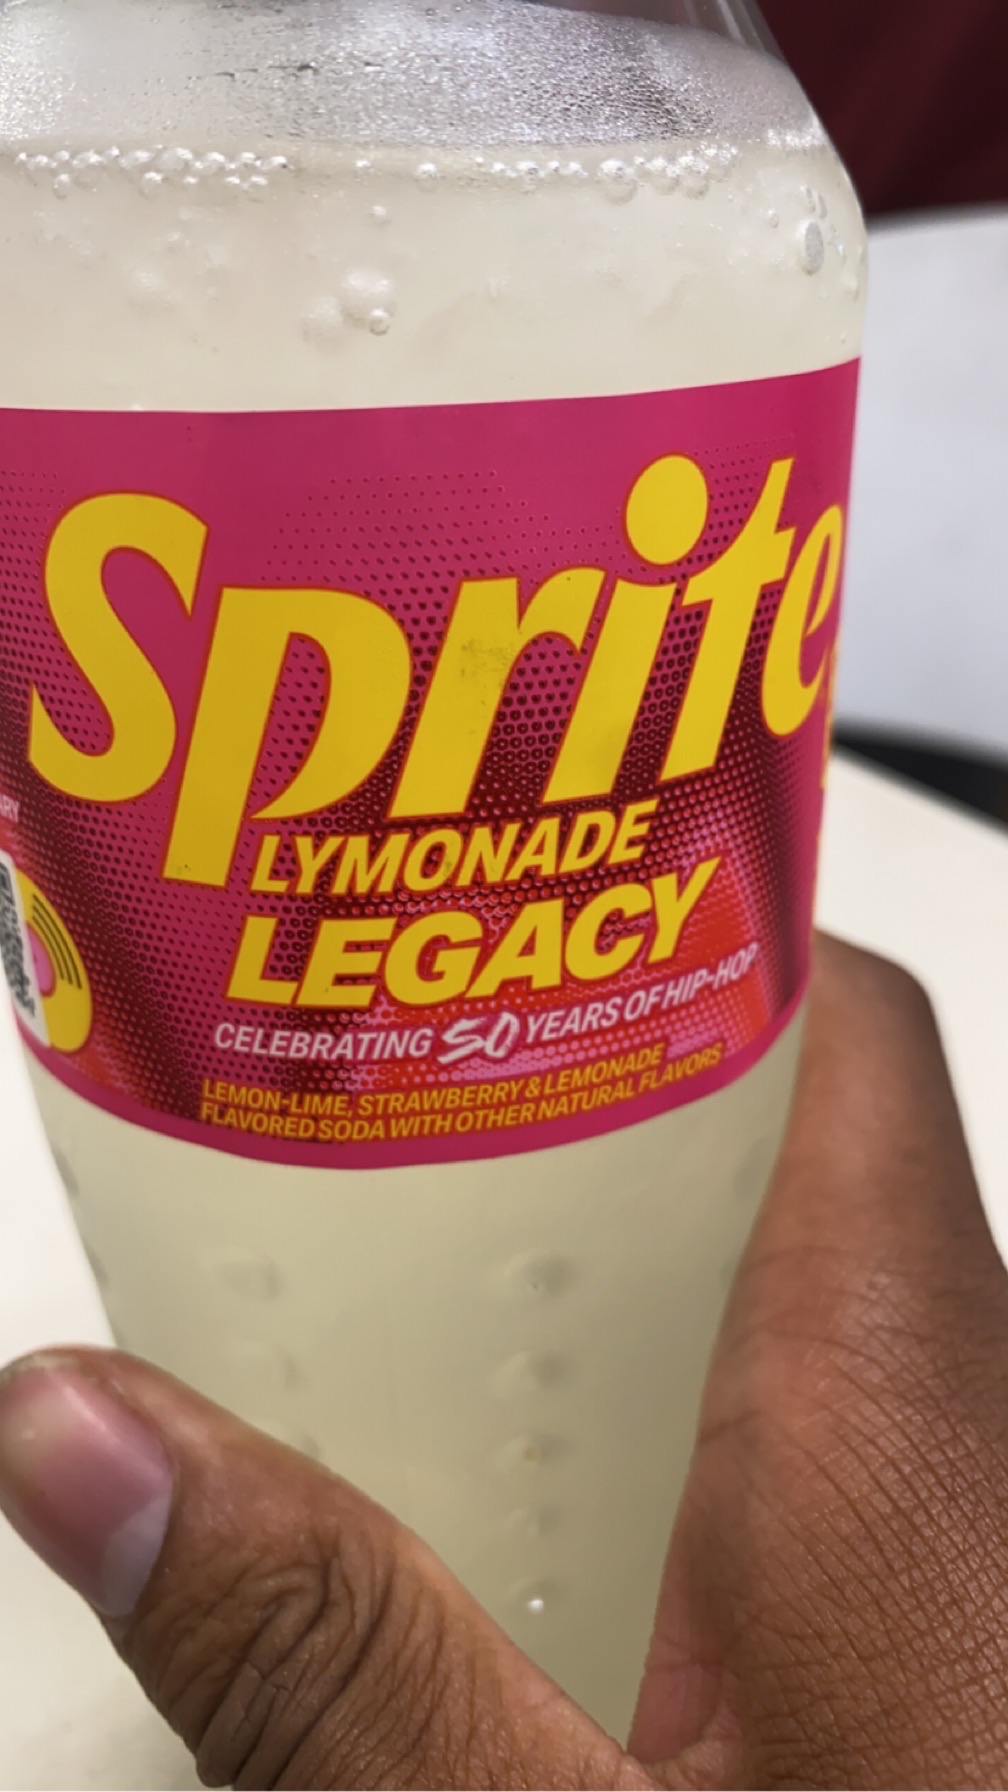 Once Again YallSprite Didn't Disappoint This Strawberry Lemonade Flavor  Hit's🤤🔥 Have You Personally Tried It!?